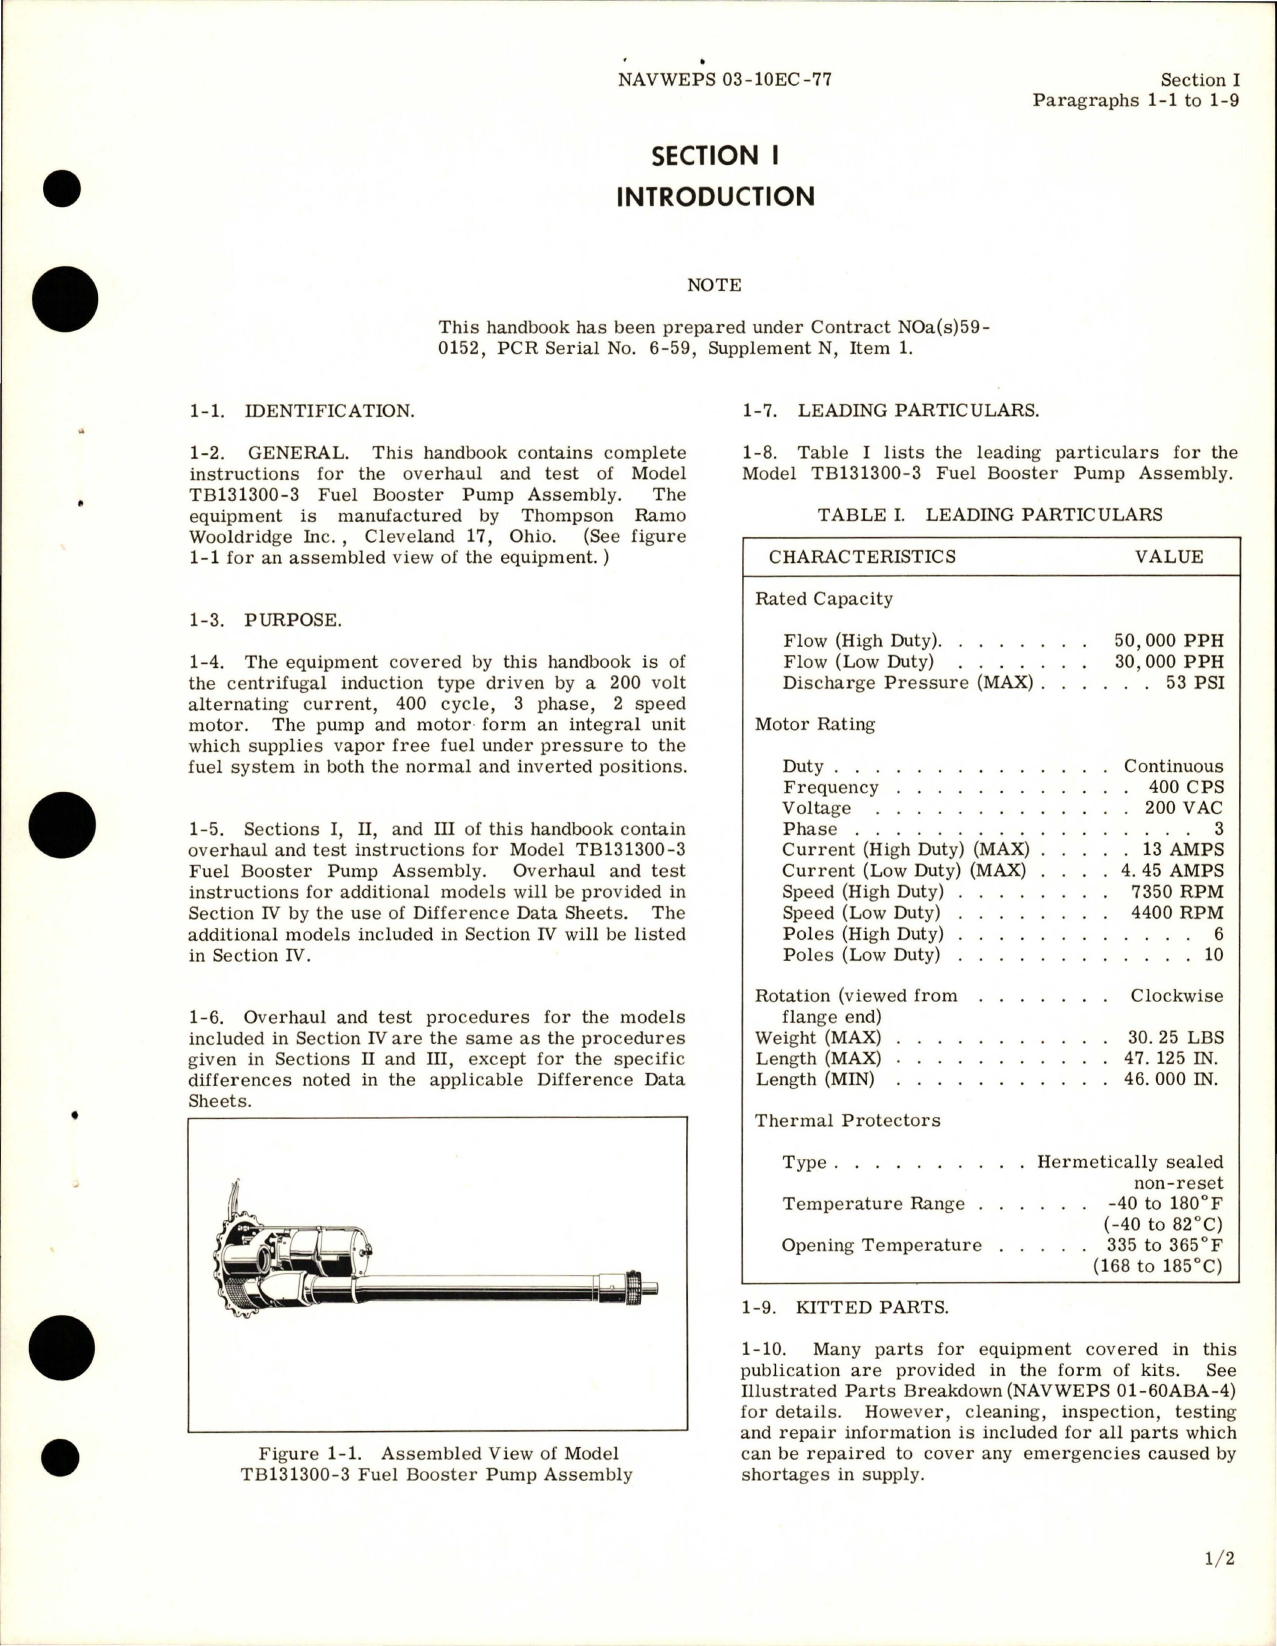 Sample page 5 from AirCorps Library document: Overhaul Instructions for Fuel Booster Pump - Model TB131300-3